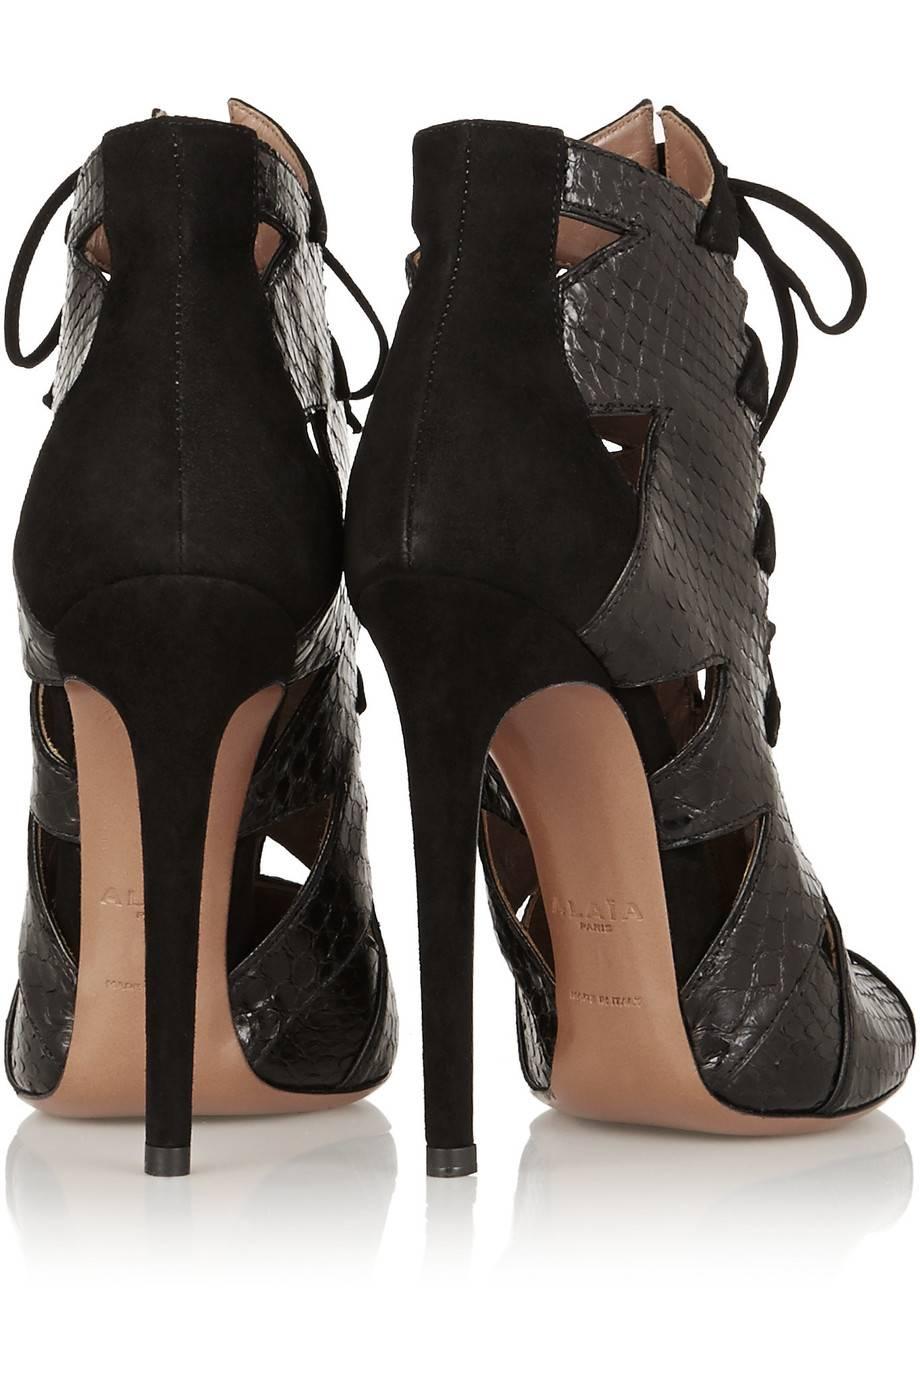 Alaia NEW & SOLD OUT Black Leather Suede Laser Tie Up Ankle Boot Booties in Box  2